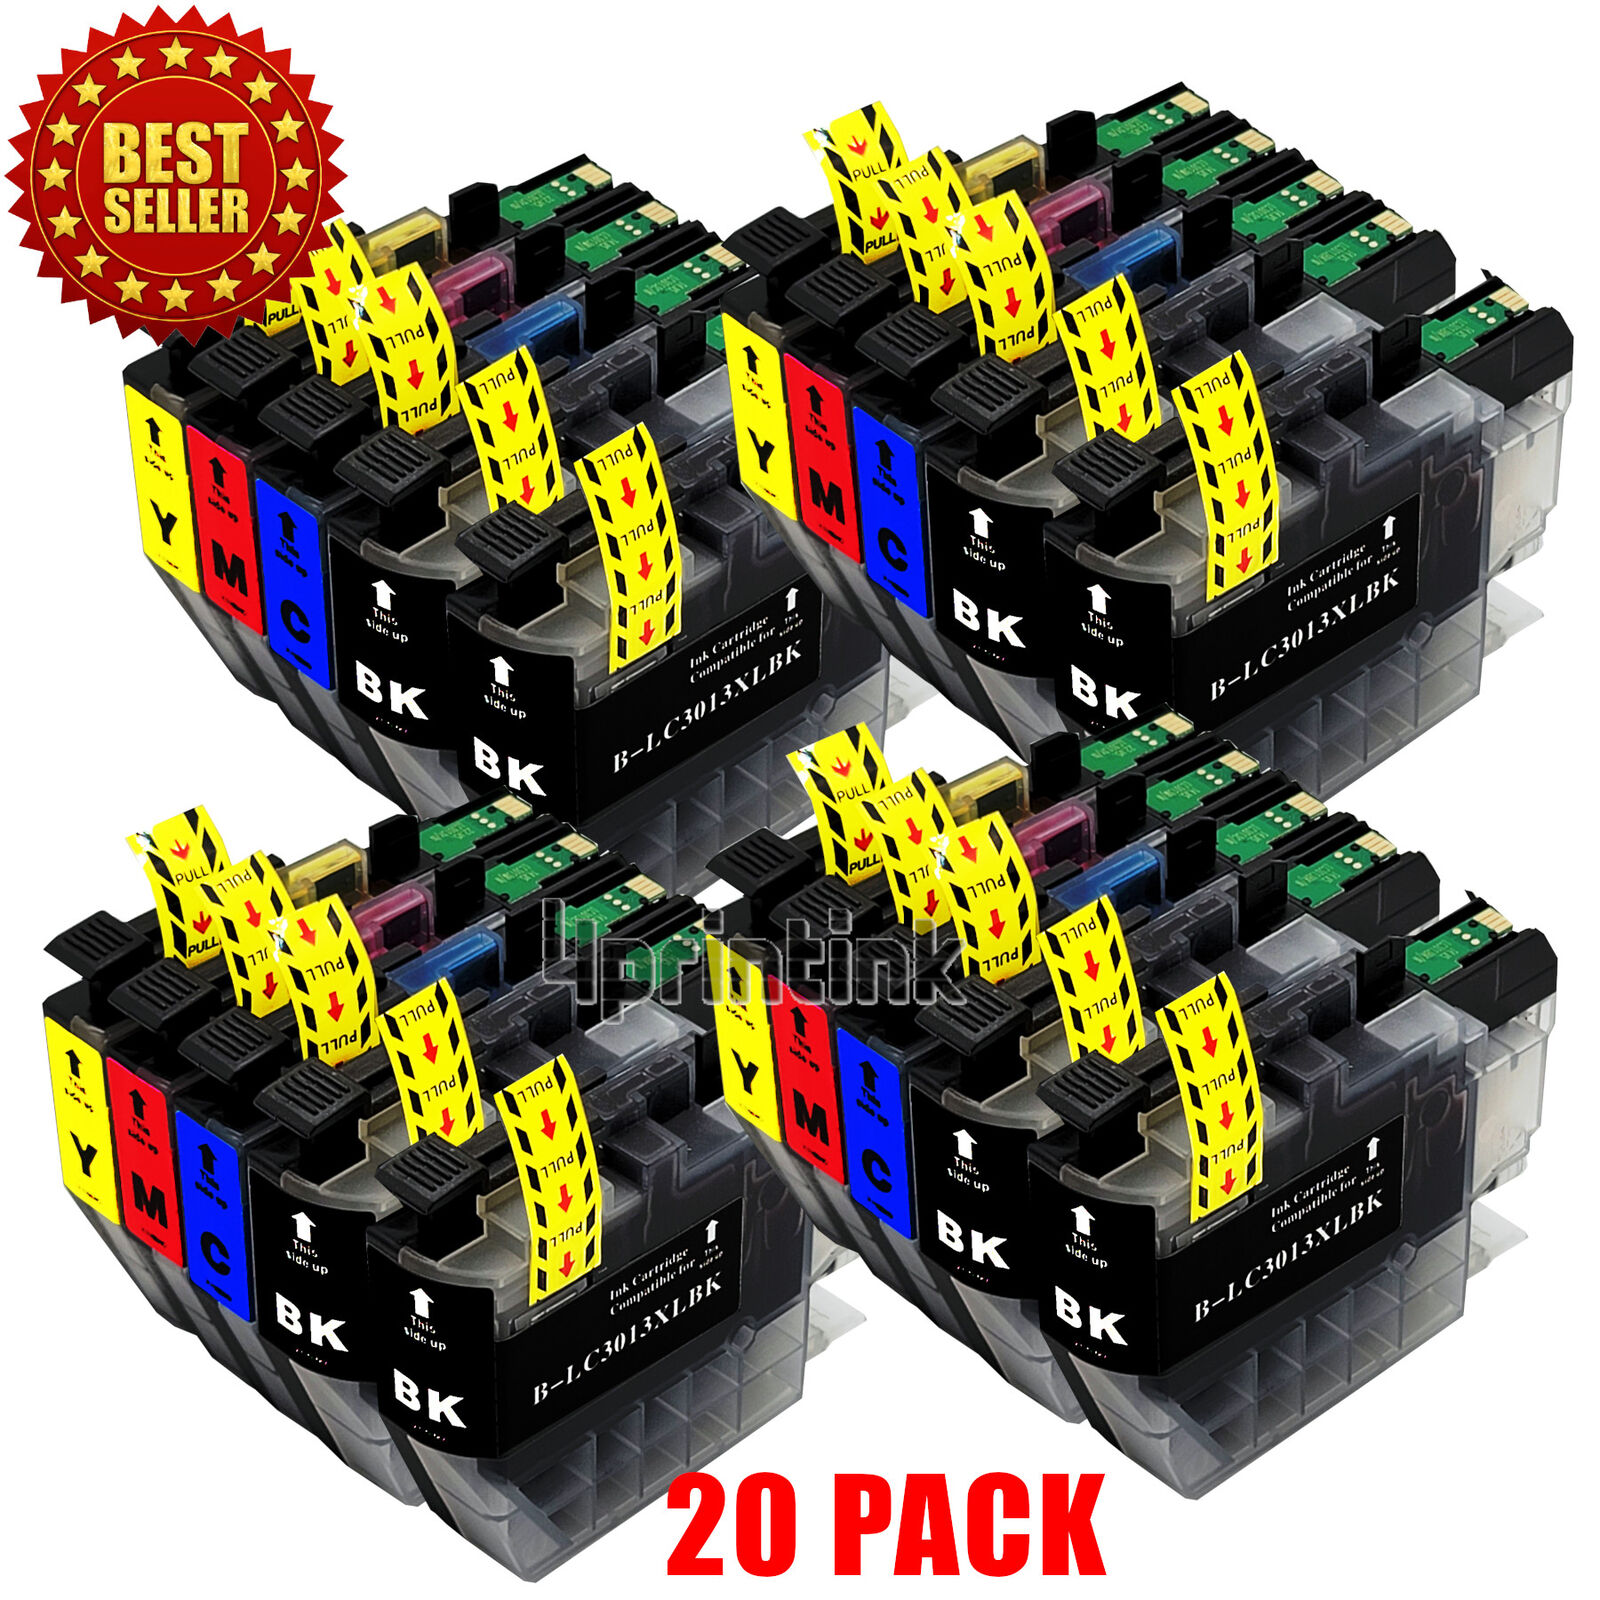 20pk LC3013 LC3011 Ink Cartridge for Brother MFC-J491DW MFC-J497DW MFC-J690DW XL